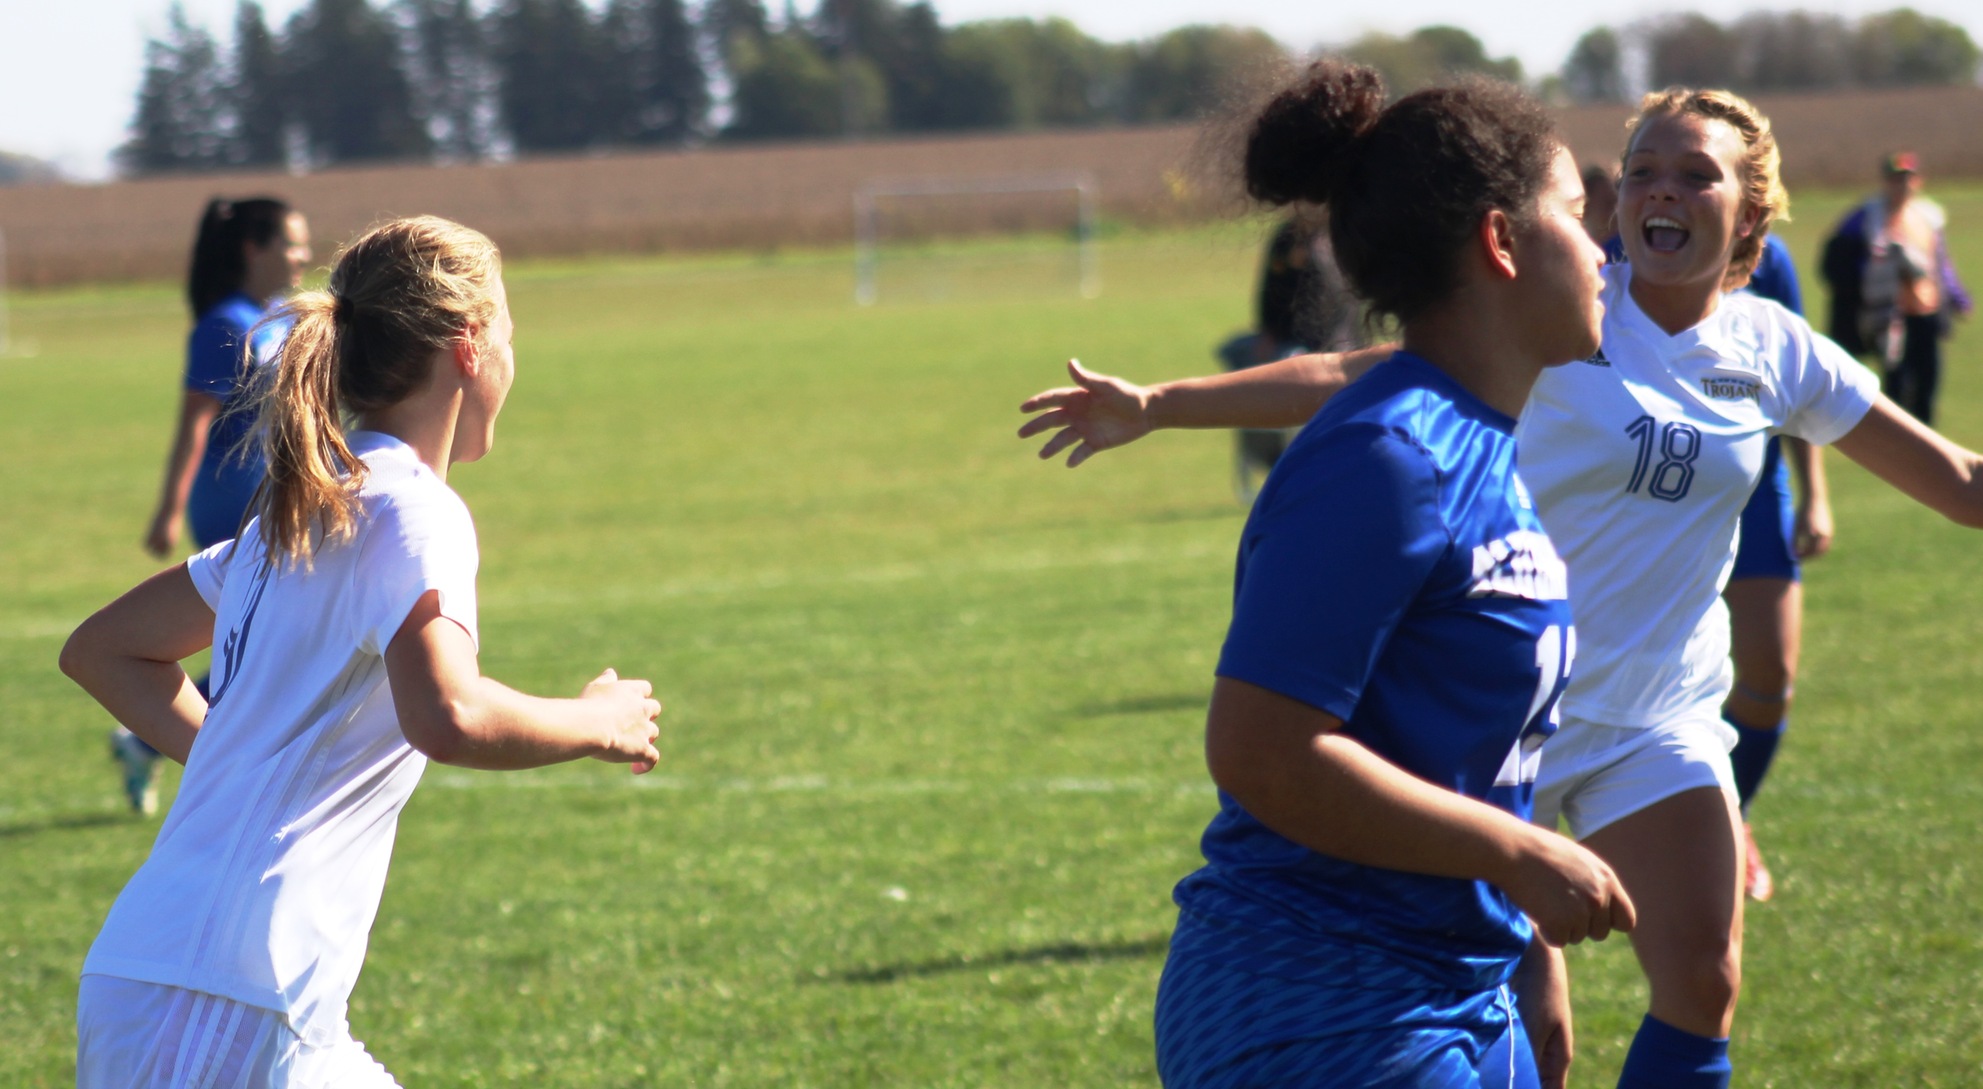 Jessica Altman (18) congratulates Lena Oliver after Oliver scored the Lady Trojans' first goal on Tuesday against DCTC.